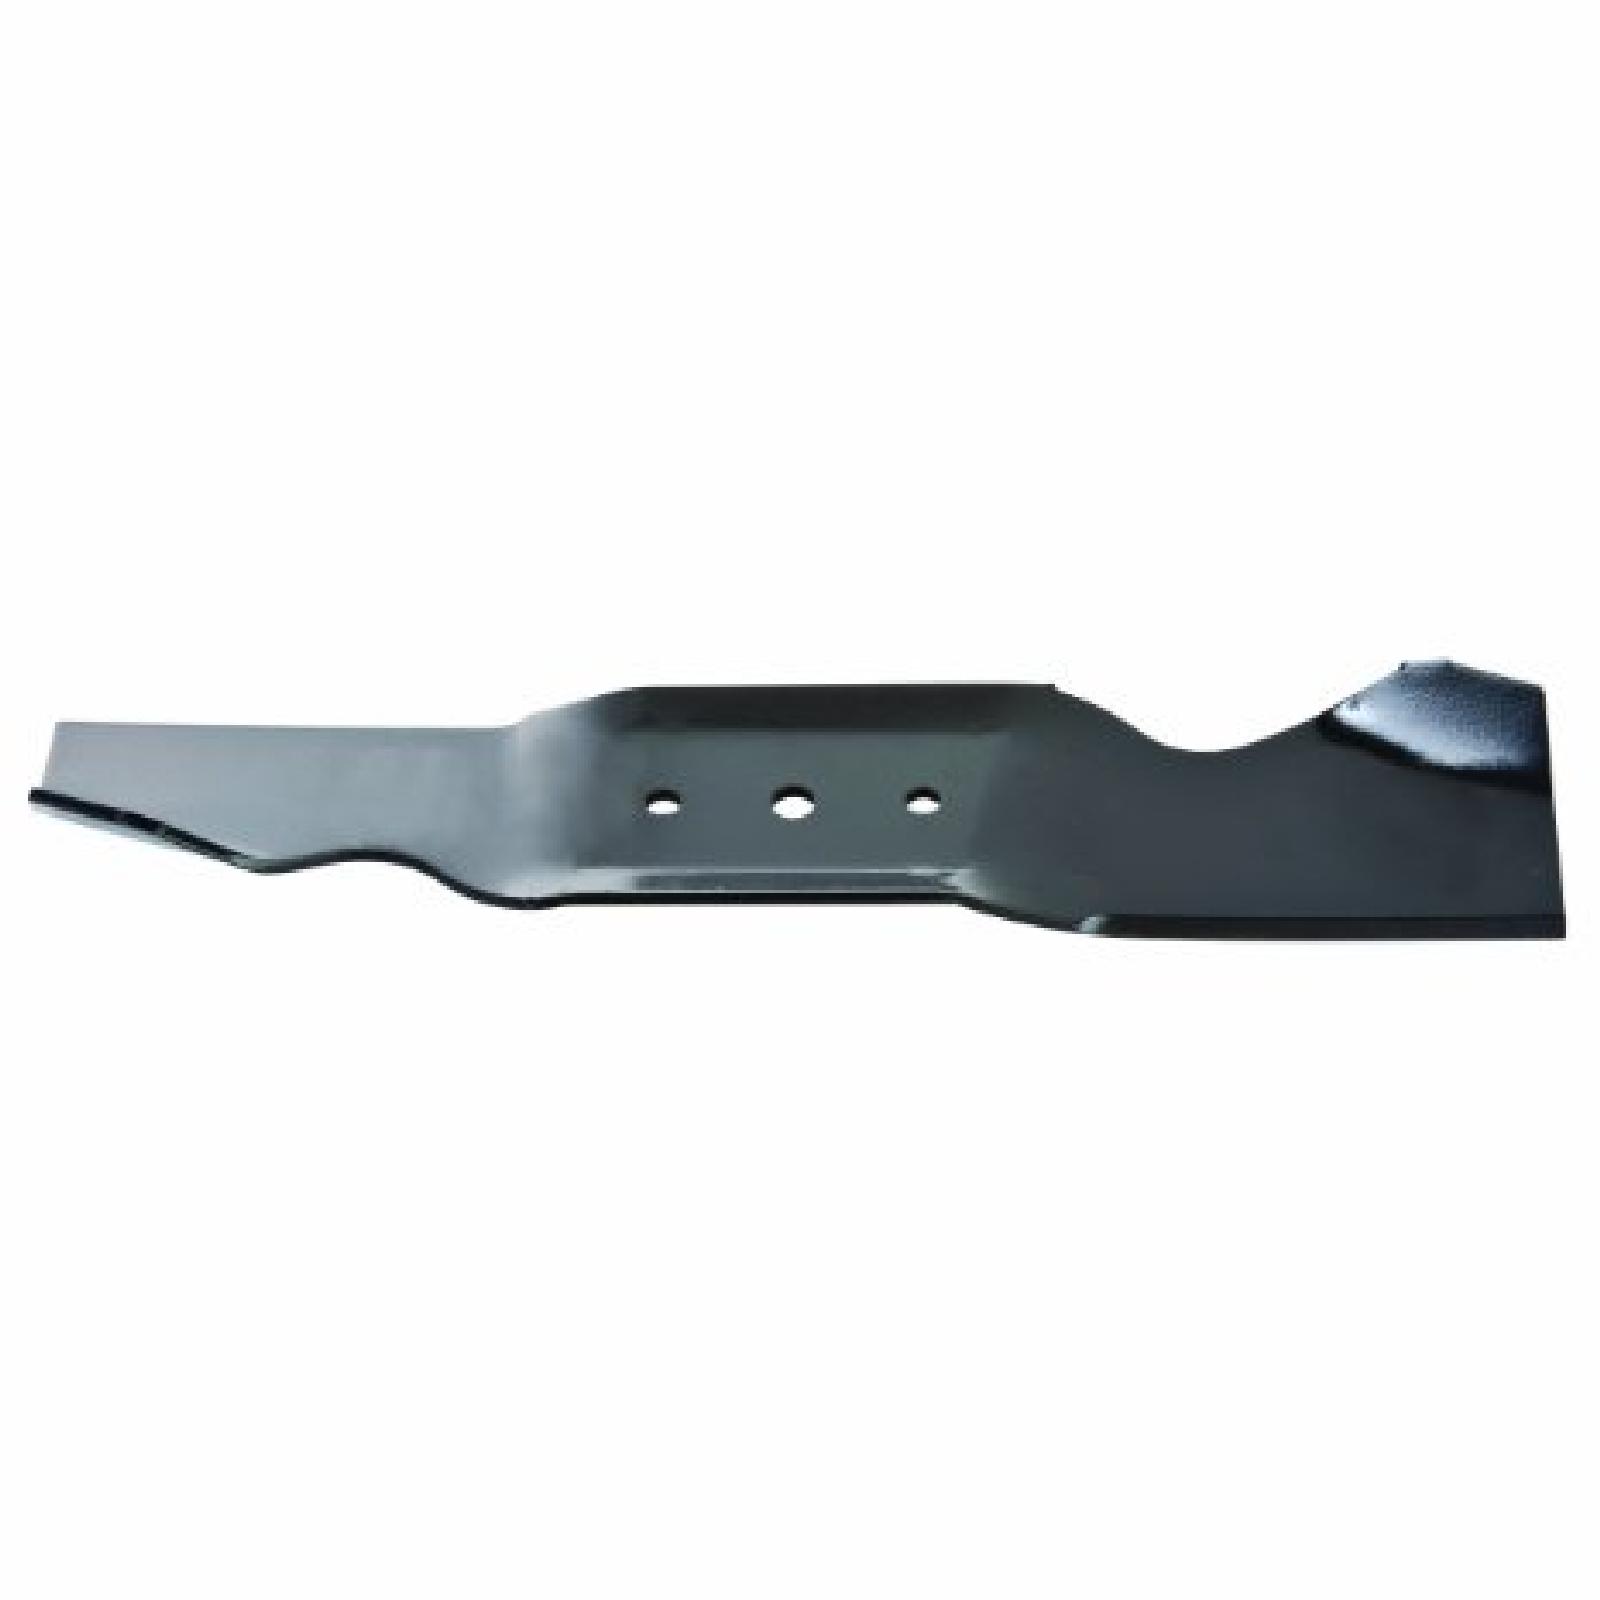 BLADE, MTD 942 0486, 14 1 part# 98-486 by Oregon - Click Image to Close